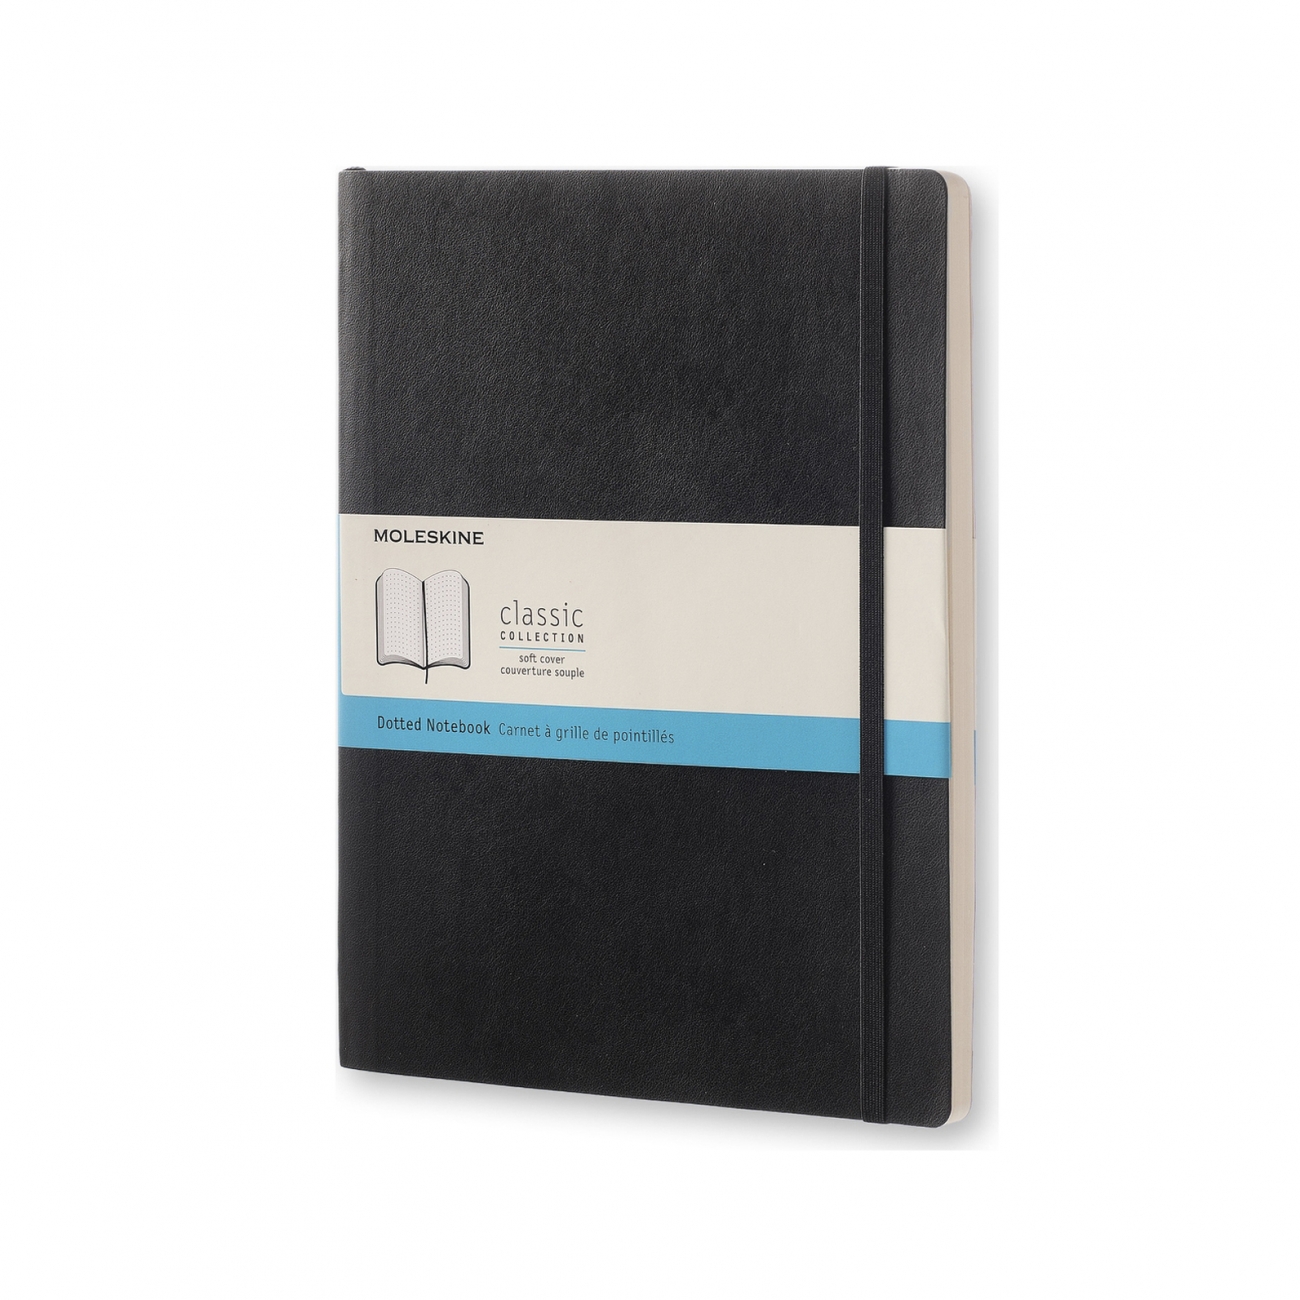 CLASSIC SOFT COVER NOTEBOOK - DOT GRID - EXTRA LARGE - BLACK